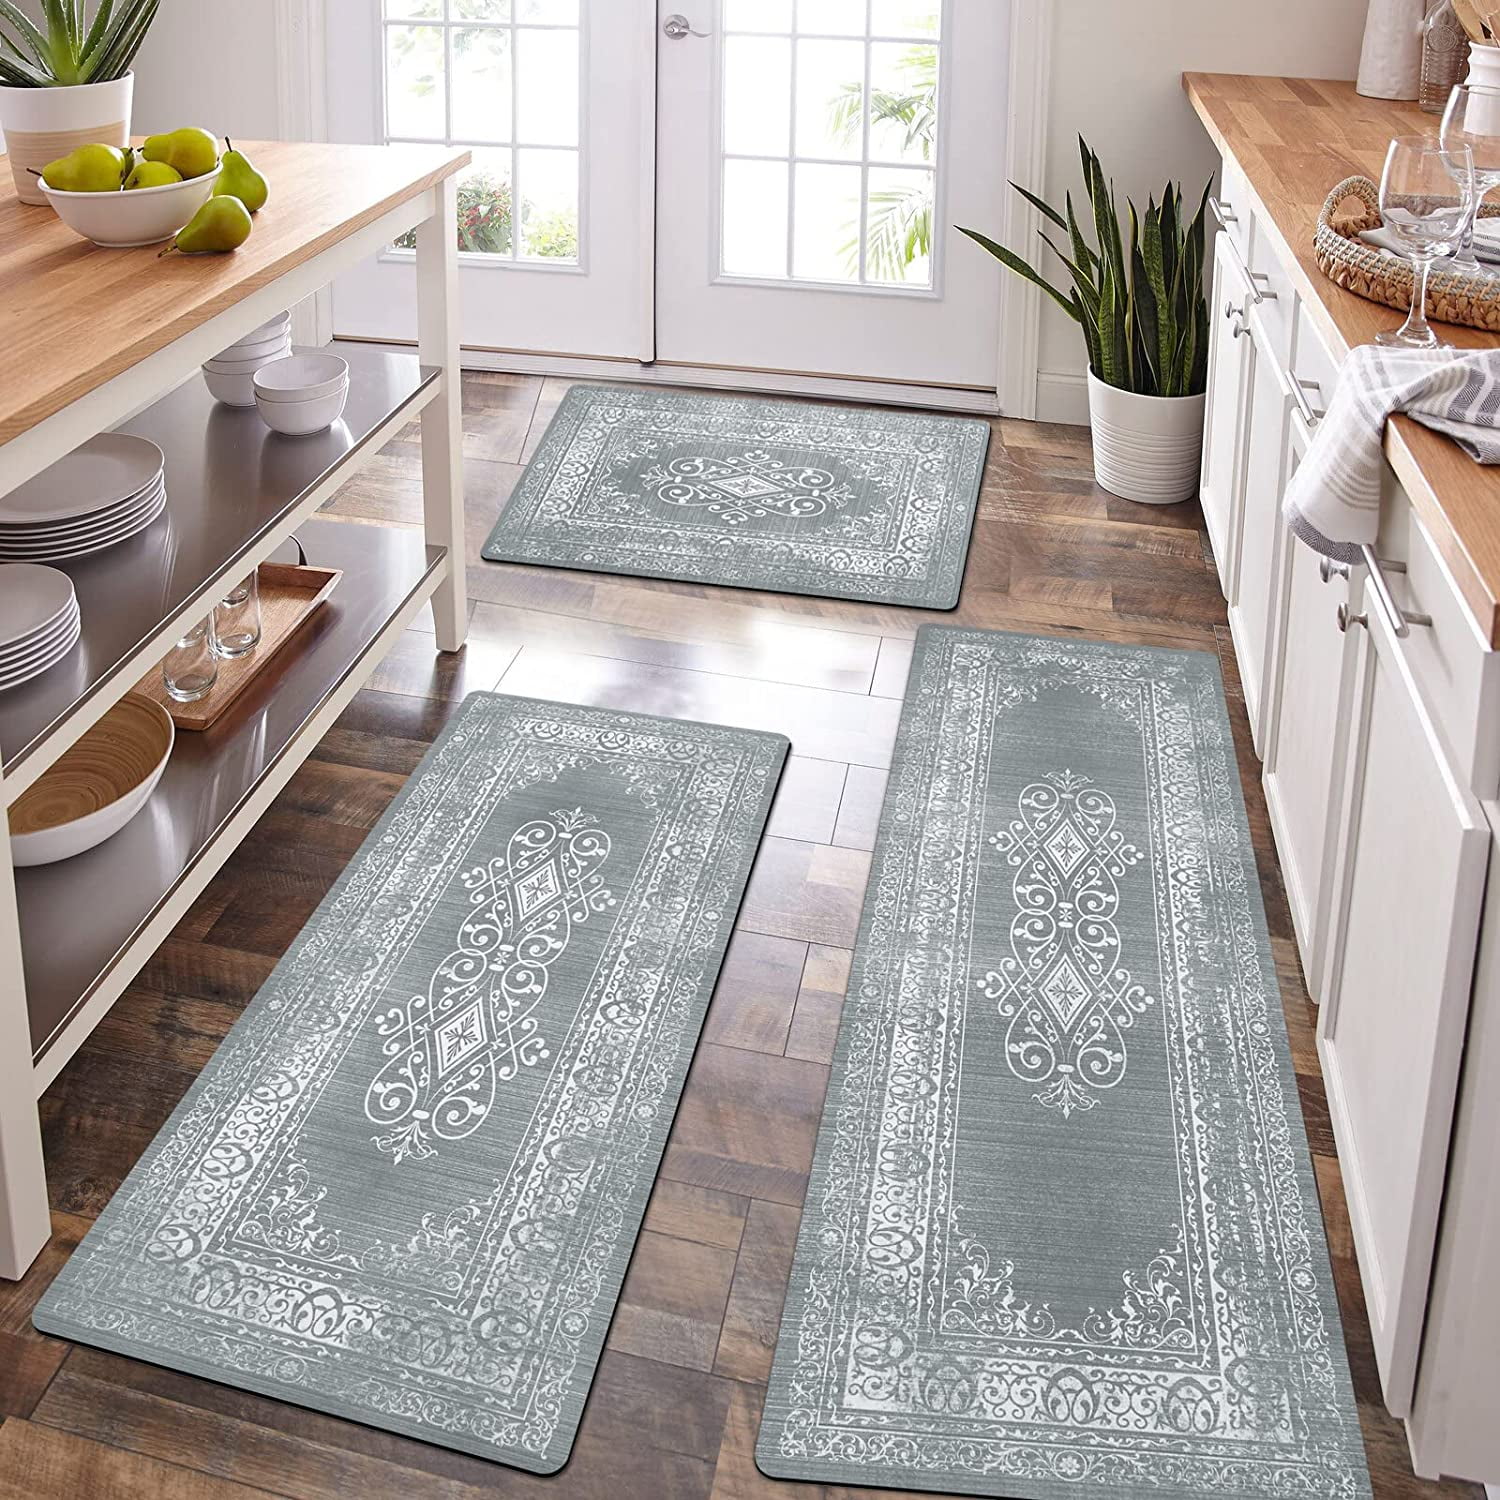 Kitchen rugs and mats • Compare & see prices now »